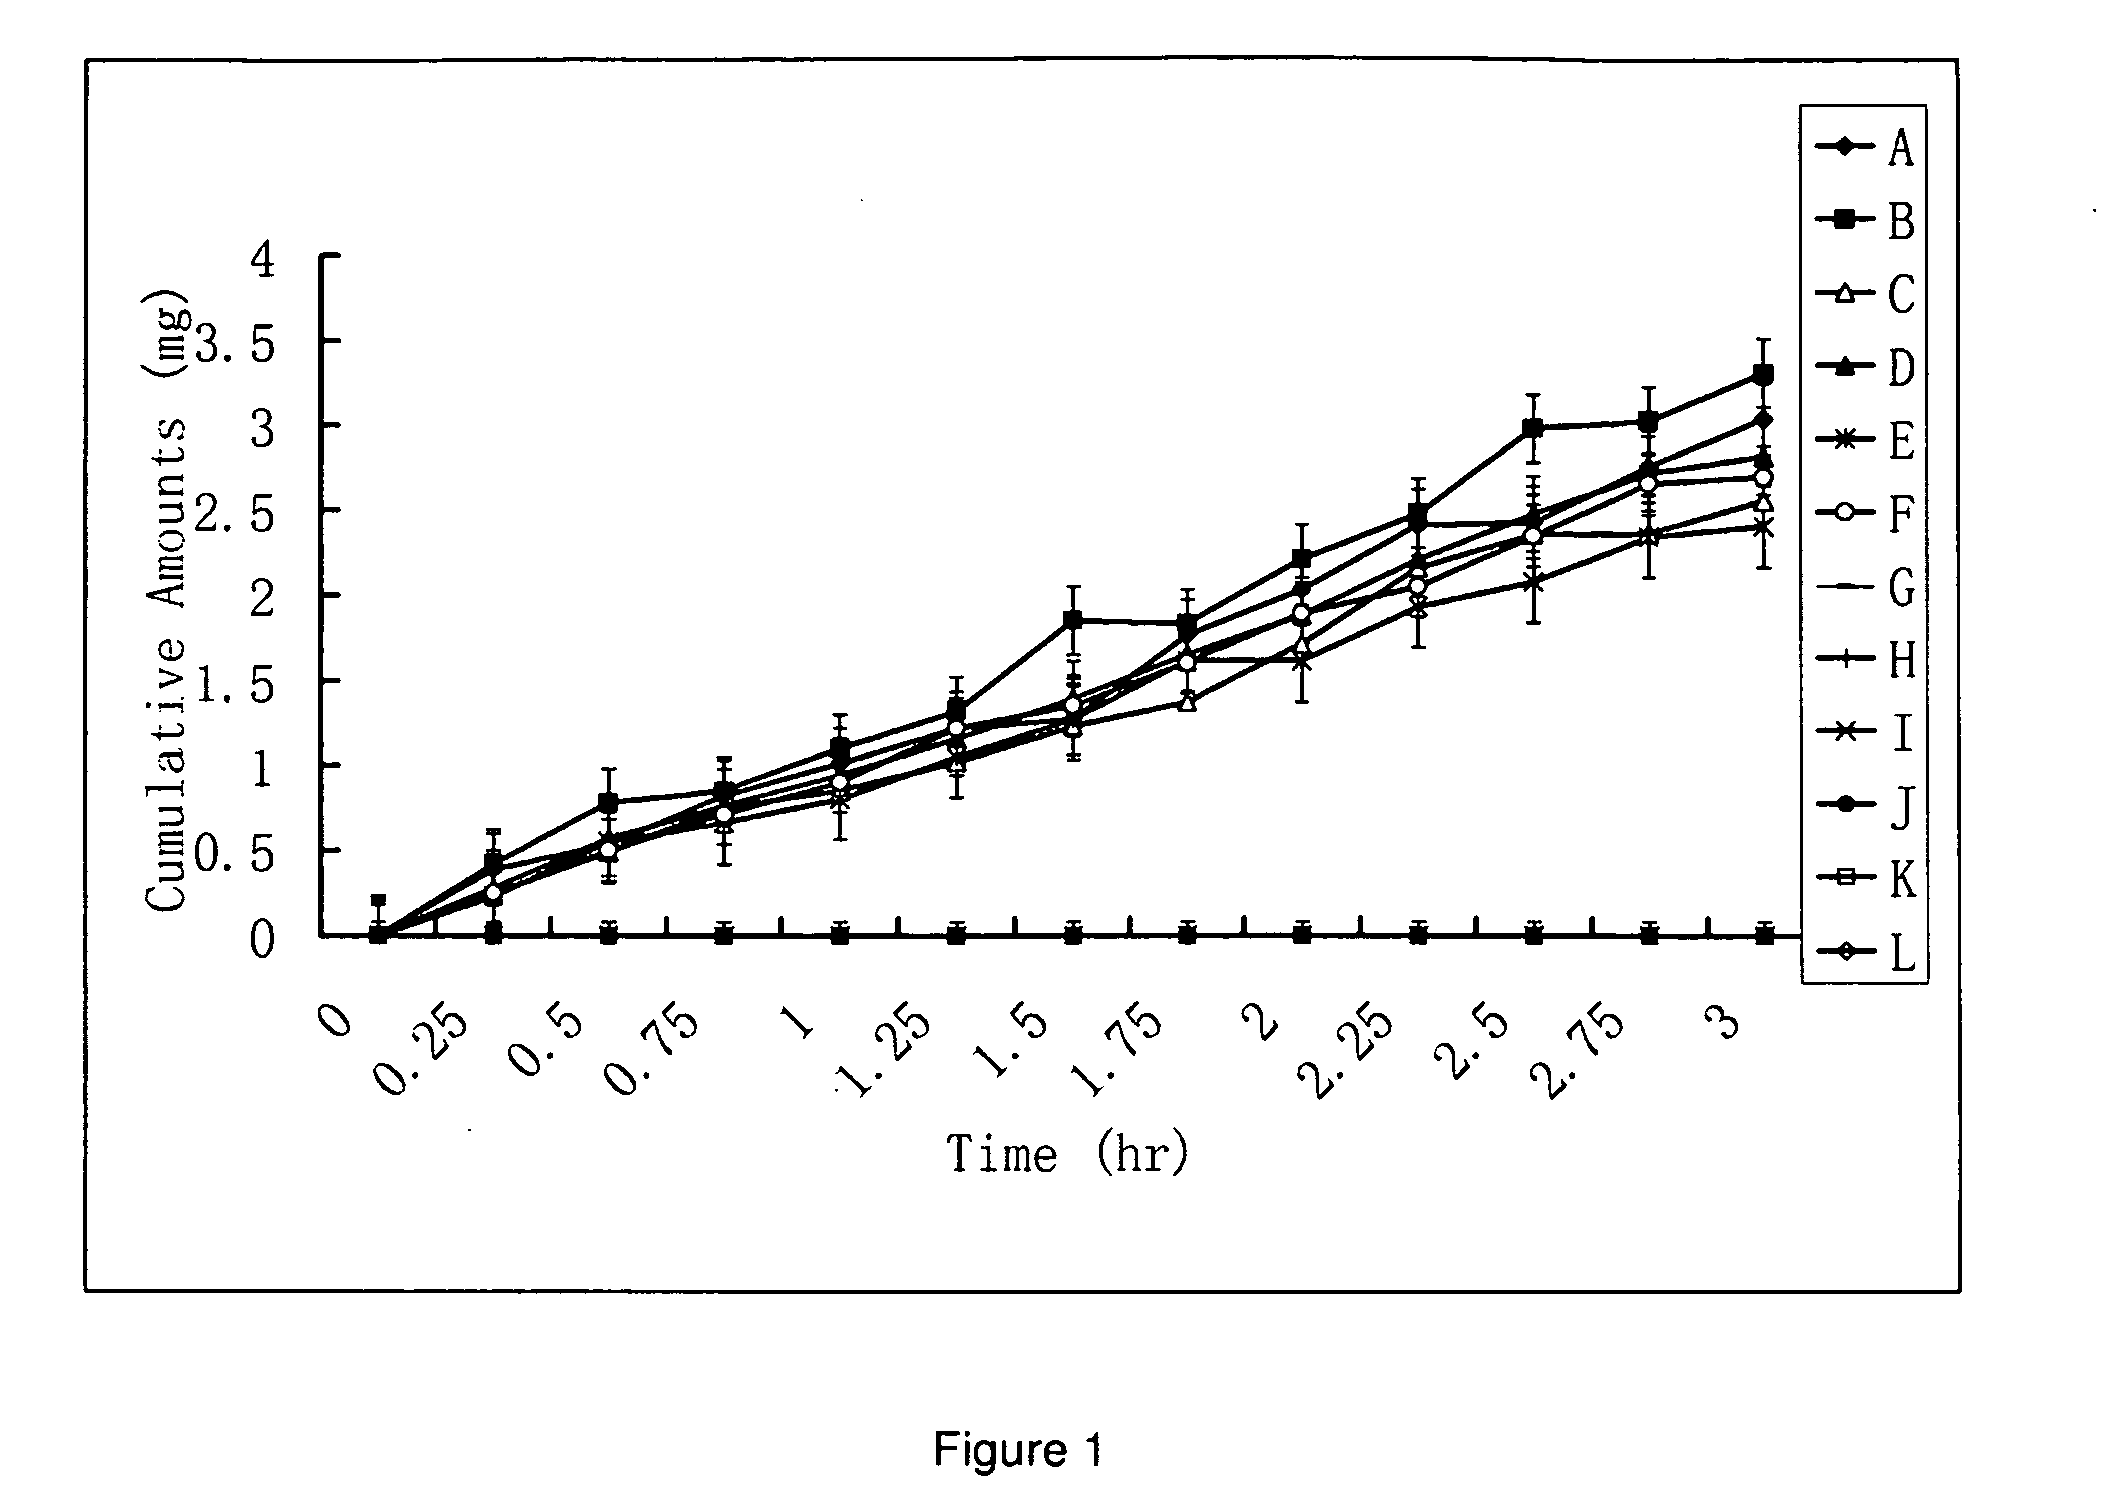 High penetration prodrug compositions of prostaglandins and related compounds